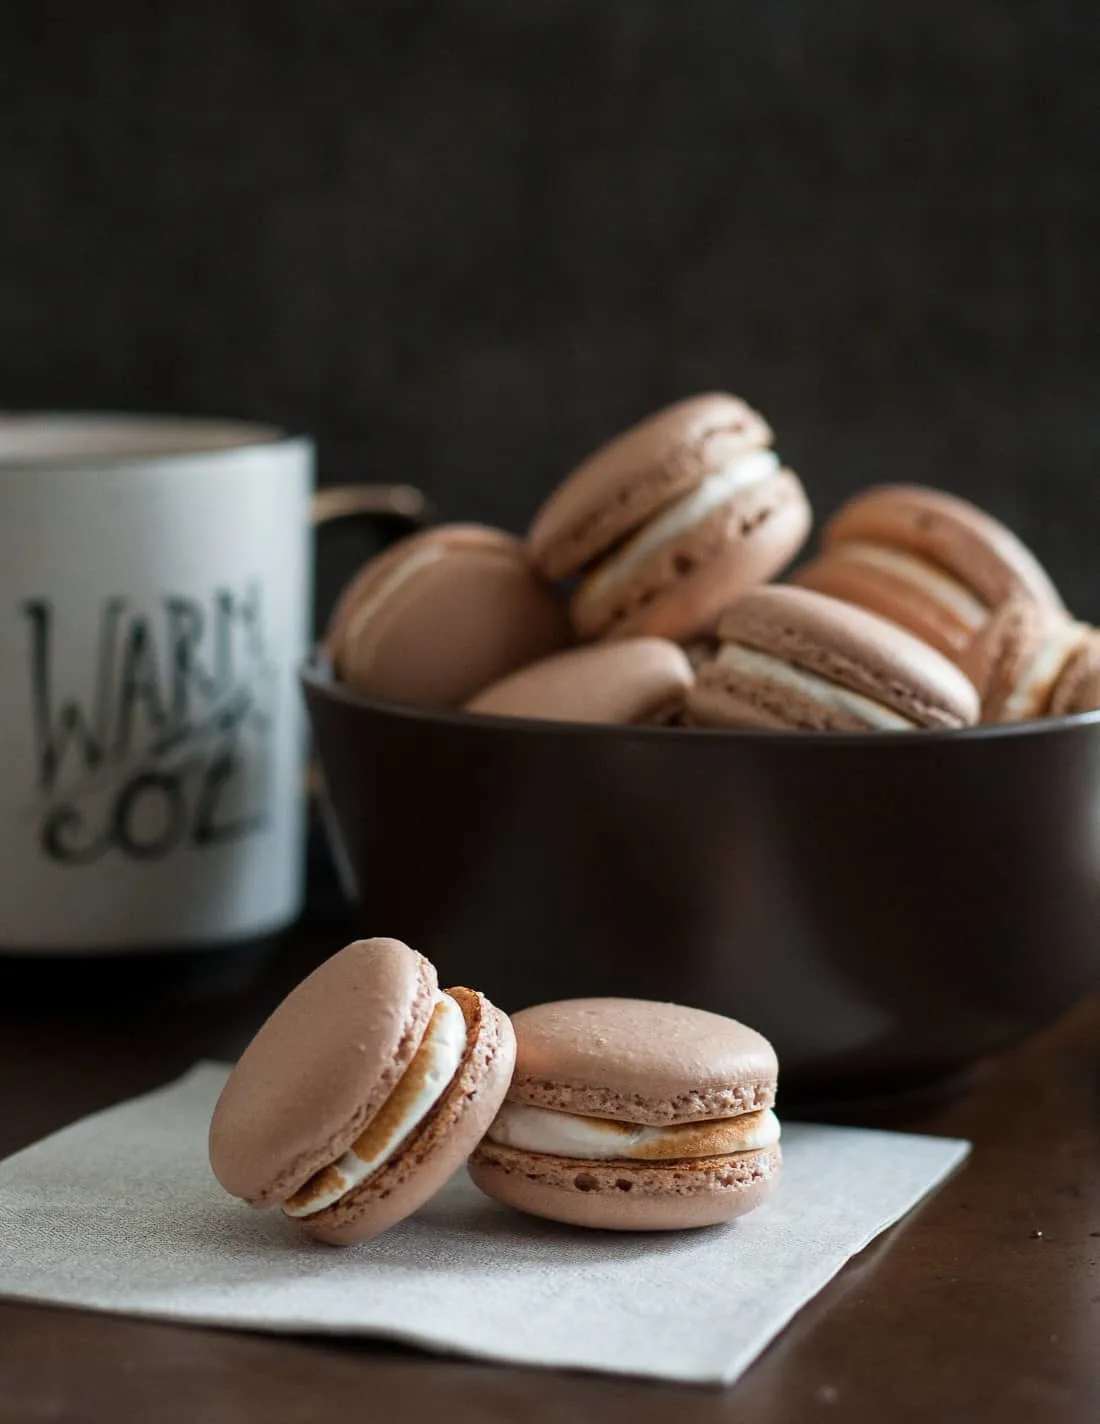 The weather outside is frightful, but hot chocolate macarons are sure to warm your heart - delightful fireplace burning or not. * Recipe on GoodieGodmother.com